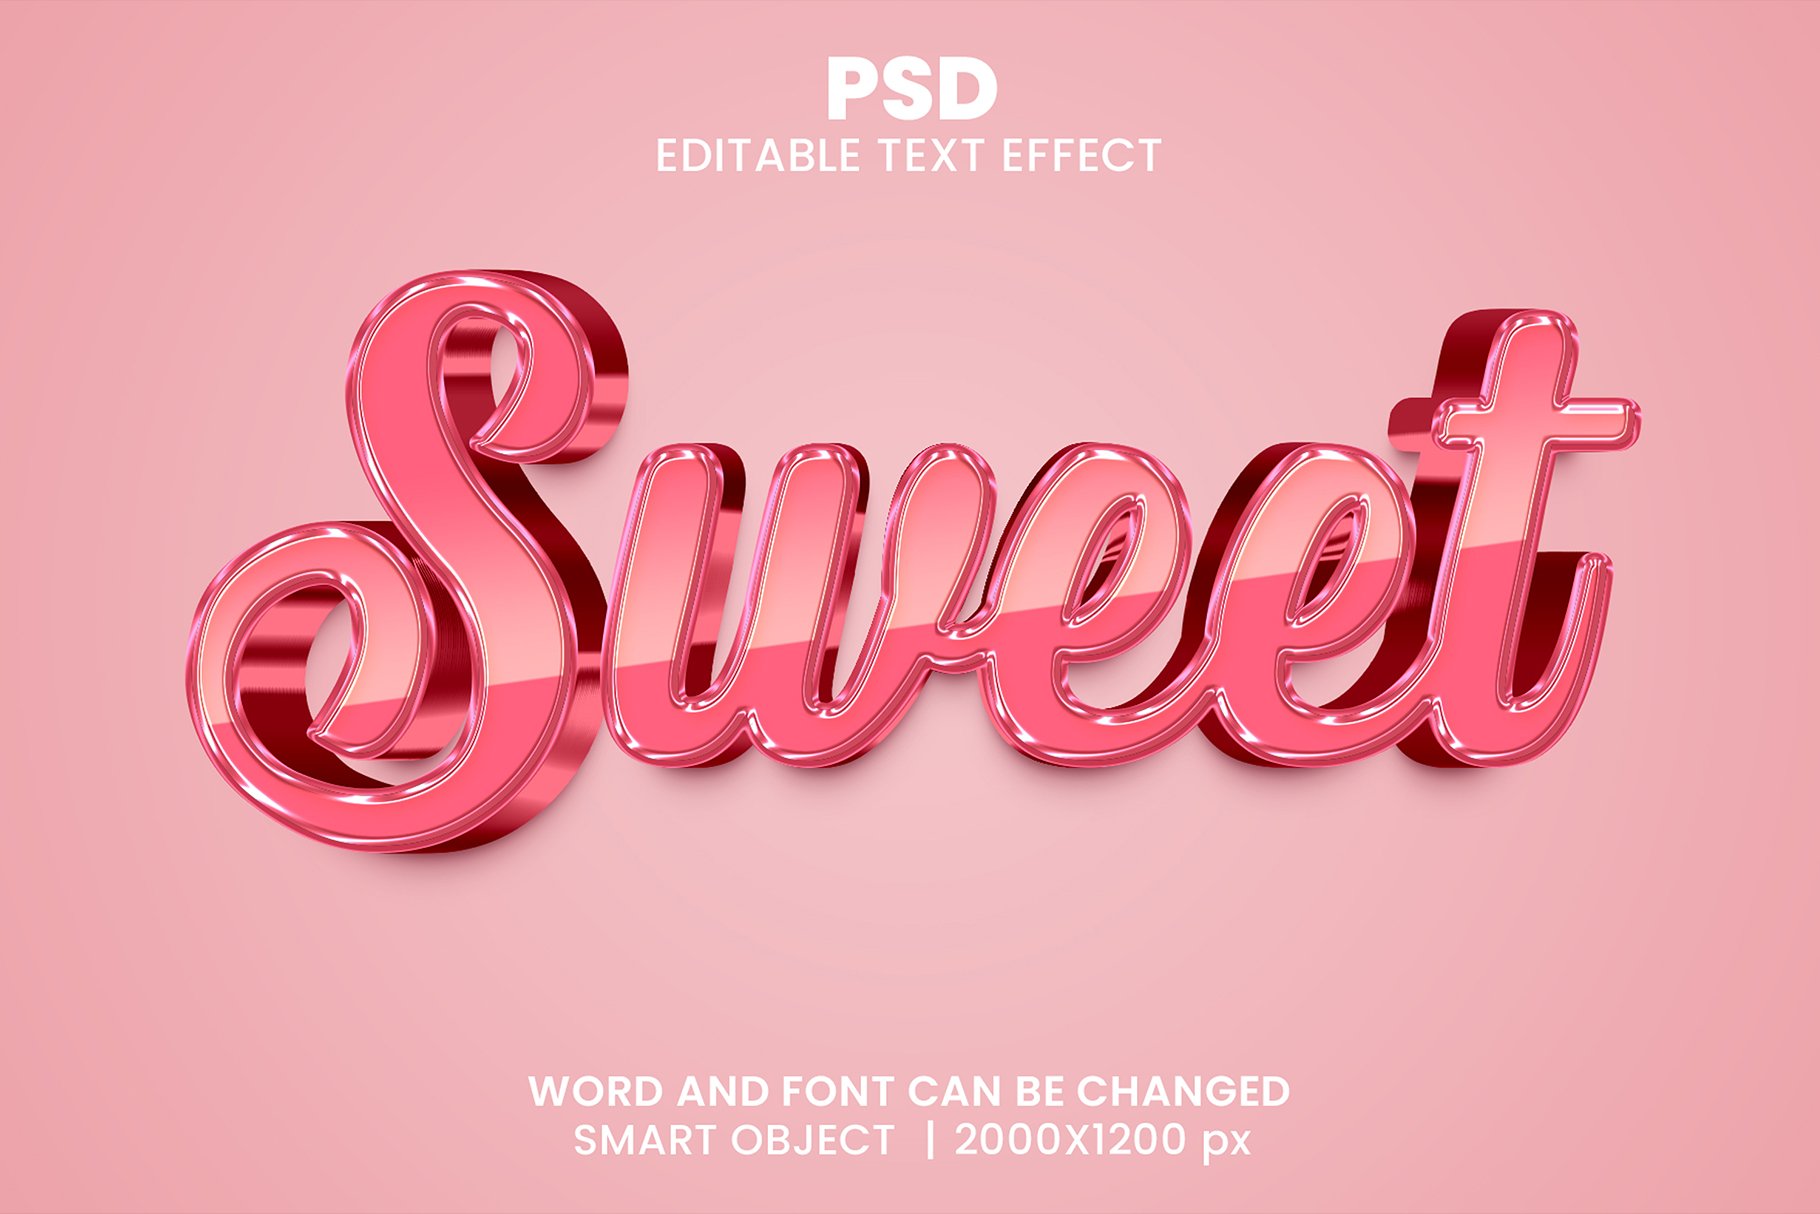 Sweet 3d Editable Psd Text Effectcover image.